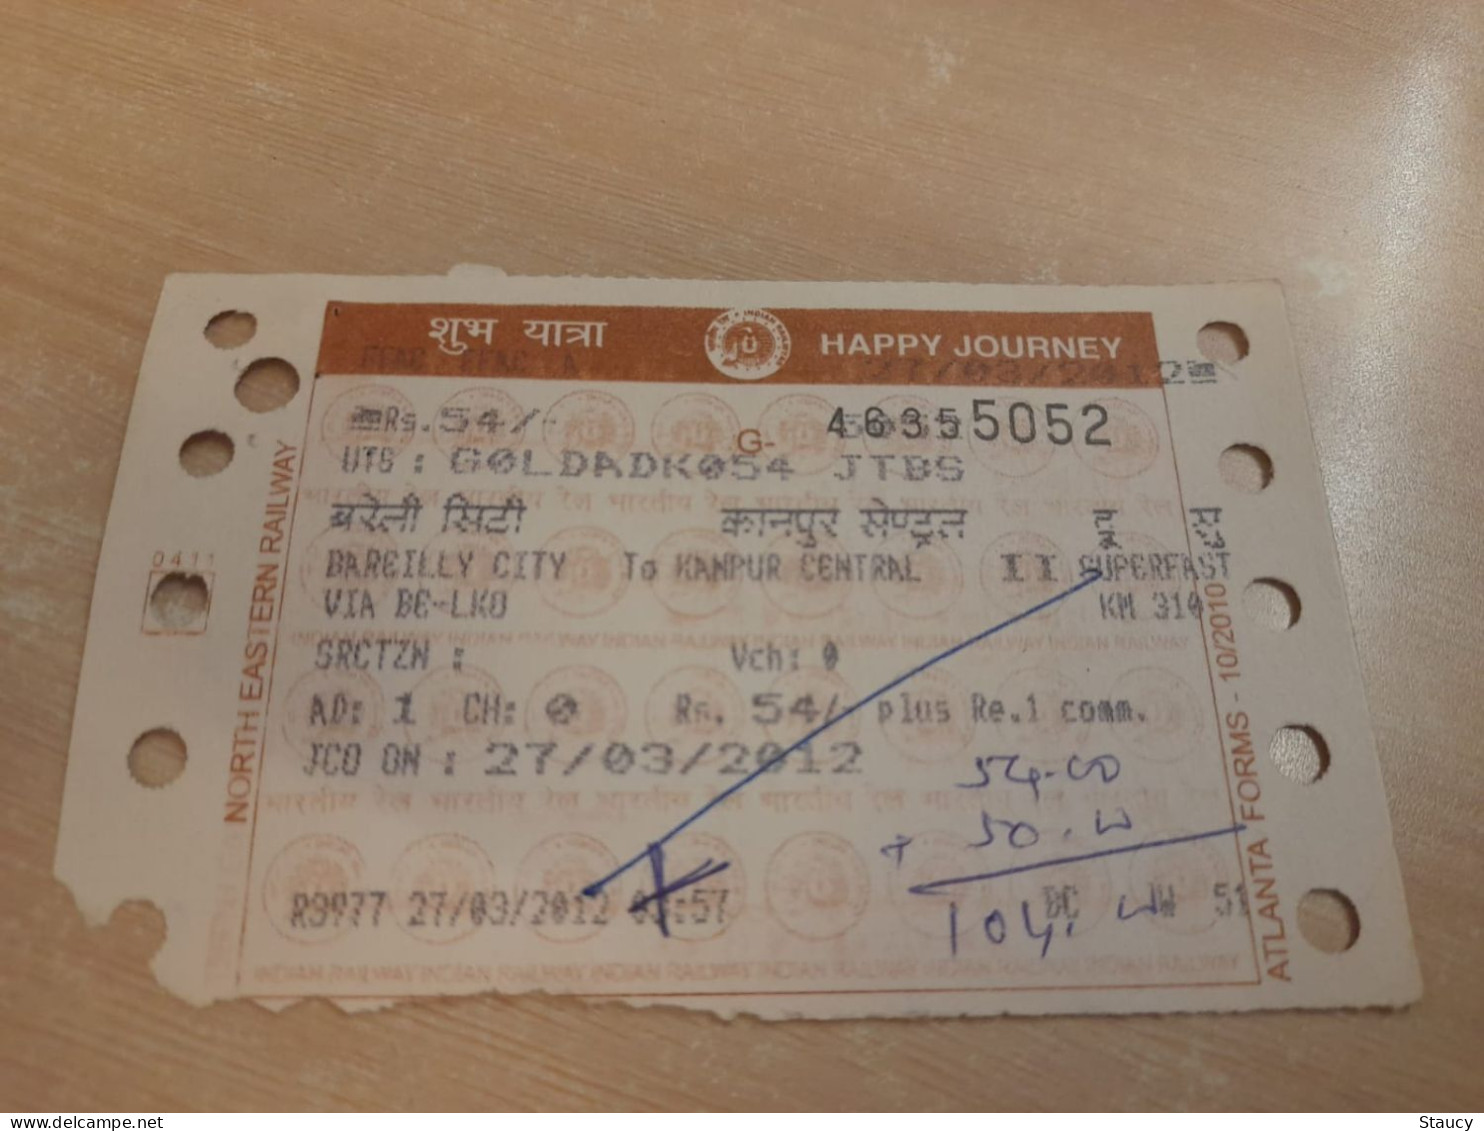 India Old / Vintage - Indian Railway / Train Ticket As Per Scan - World